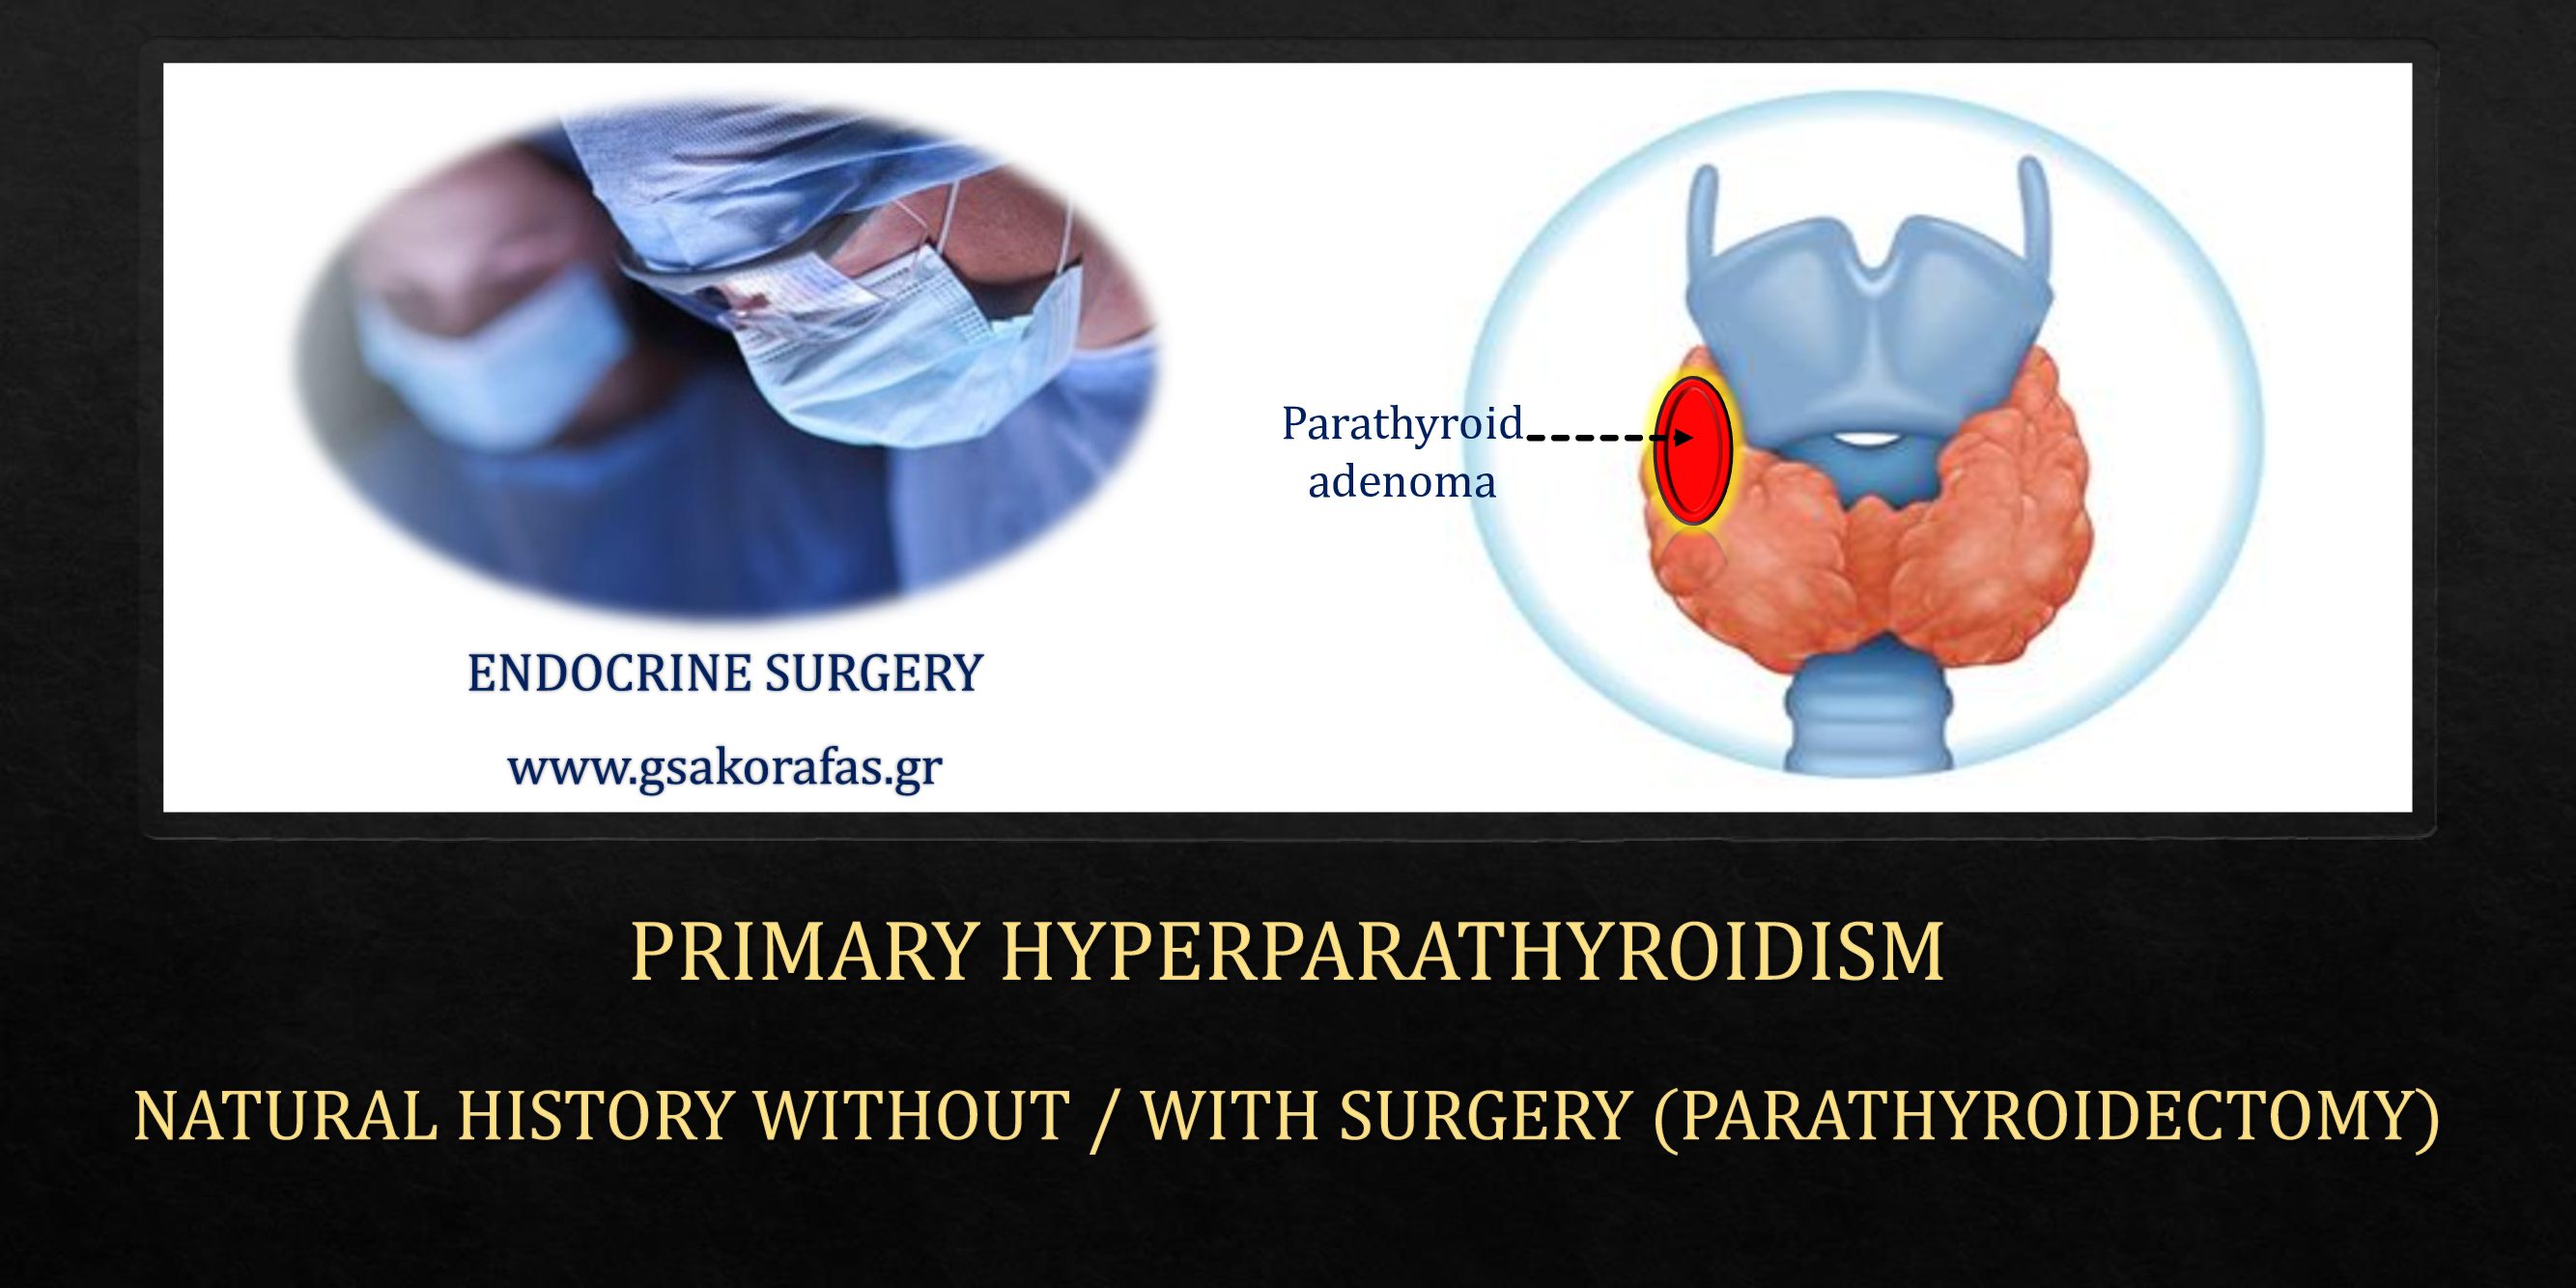 Hyperparathyroidism Parathyroidectomy And Natural History Of The Disease